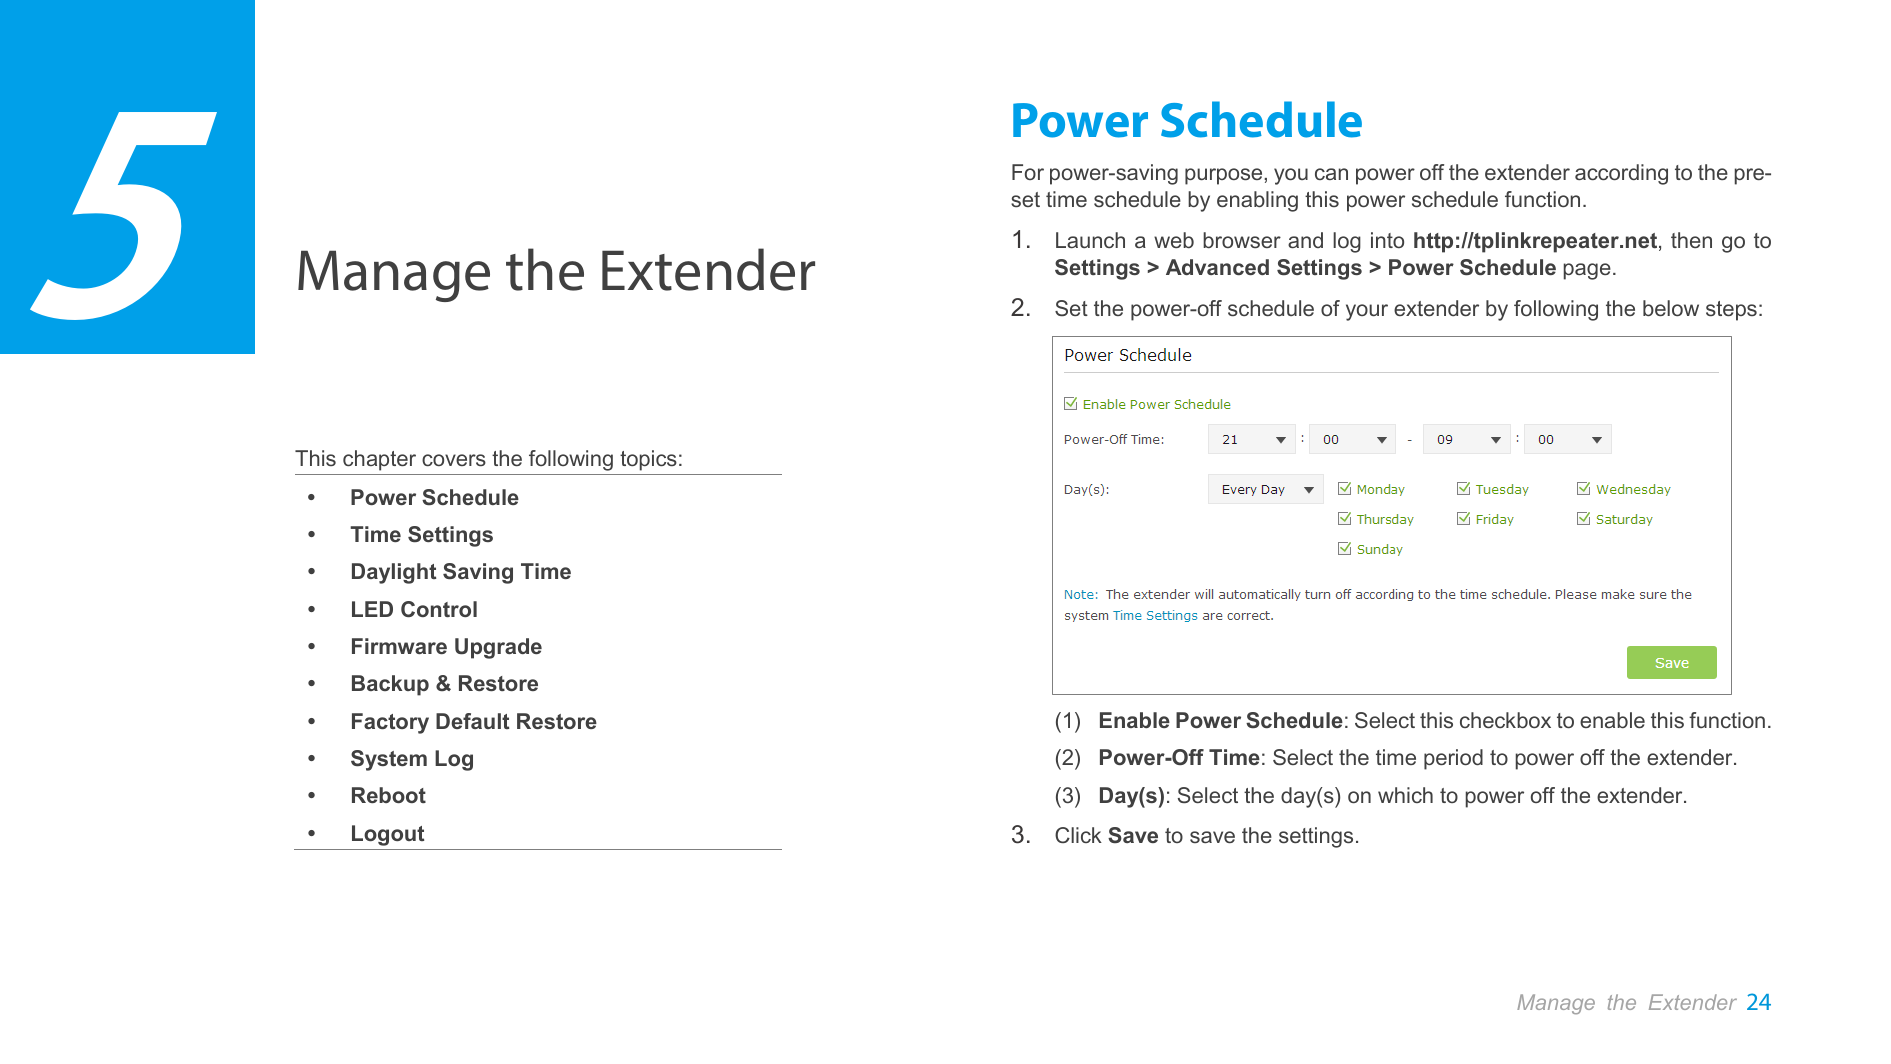  Manage the Extender 24  Manage the Extender    This chapter covers the following topics:  Power Schedule  Time Settings  Daylight Saving Time  LED Control  Firmware Upgrade  Backup &amp; Restore  Factory Default Restore  System Log  Reboot  Logout Power Schedule For power-saving purpose, you can power off the extender according to the pre-set time schedule by enabling this power schedule function. 1. Launch a web browser and log into http://tplinkrepeater.net, then go to Settings &gt; Advanced Settings &gt; Power Schedule page. 2. Set the power-off schedule of your extender by following the below steps:  (1) Enable Power Schedule: Select this checkbox to enable this function. (2) Power-Off Time: Select the time period to power off the extender. (3) Day(s): Select the day(s) on which to power off the extender. 3. Click Save to save the settings. 5 